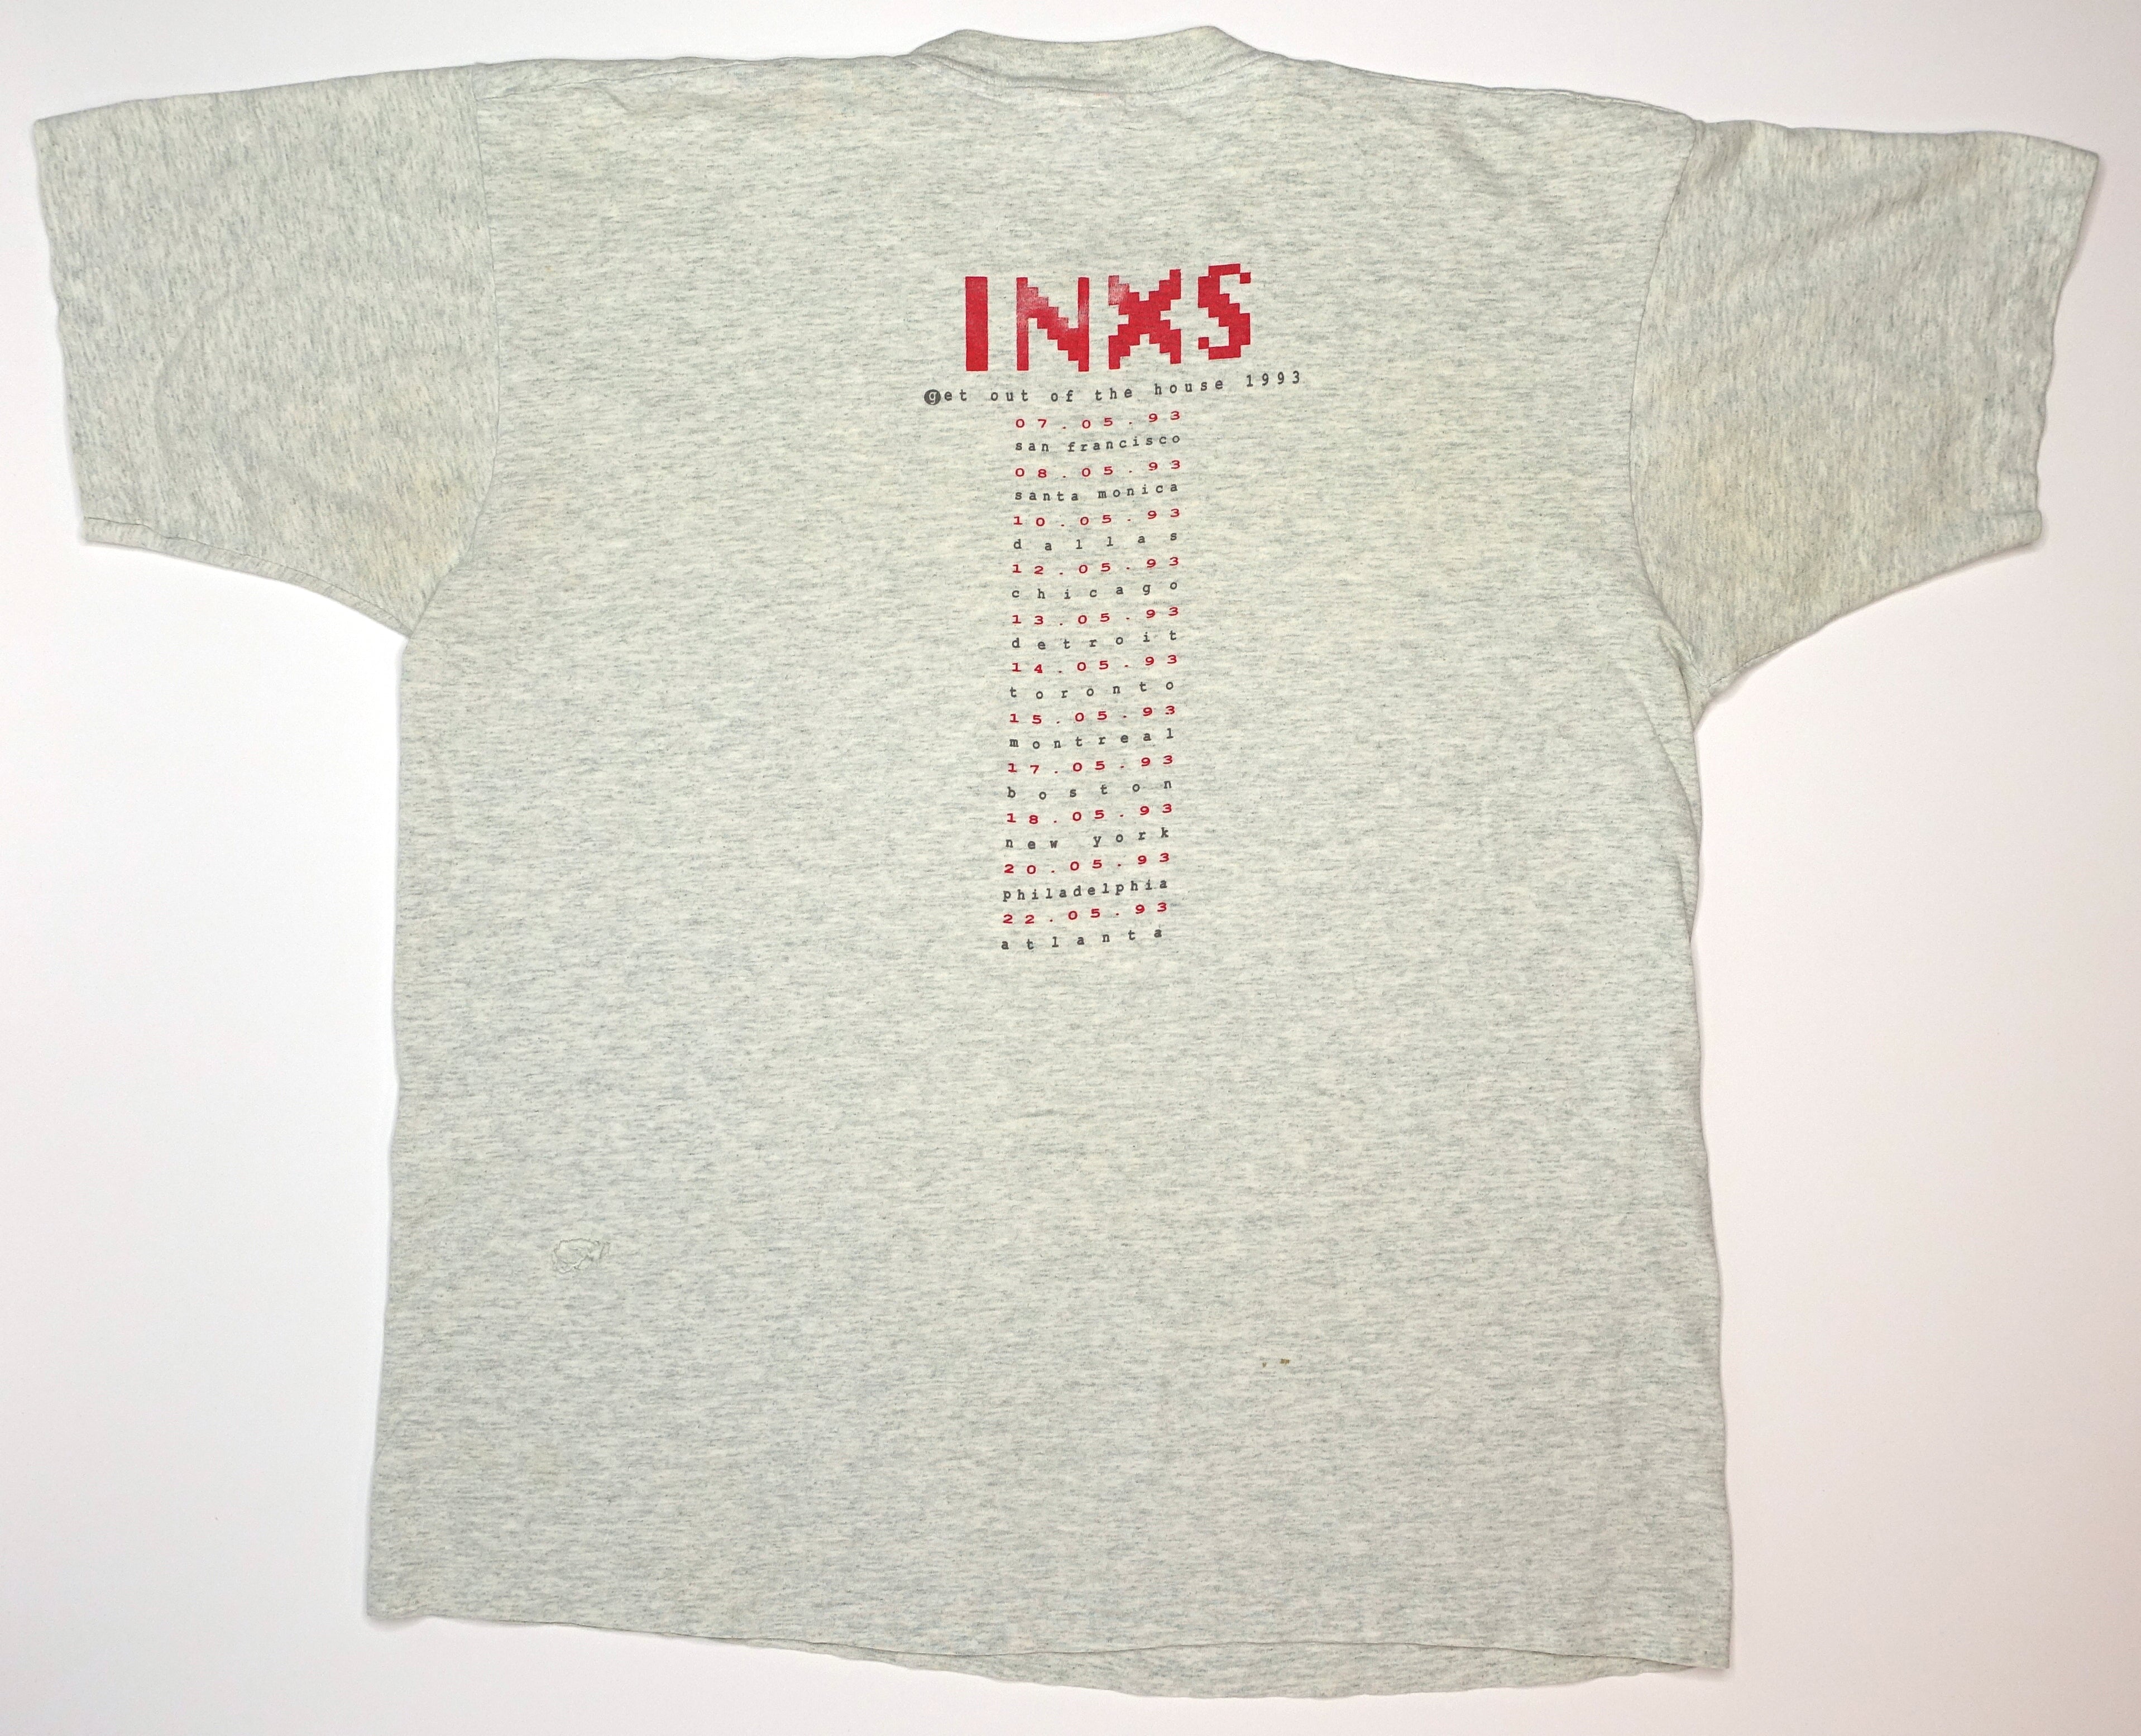 INXS - Get out Of The House 1993 Tour Shirt Size XL